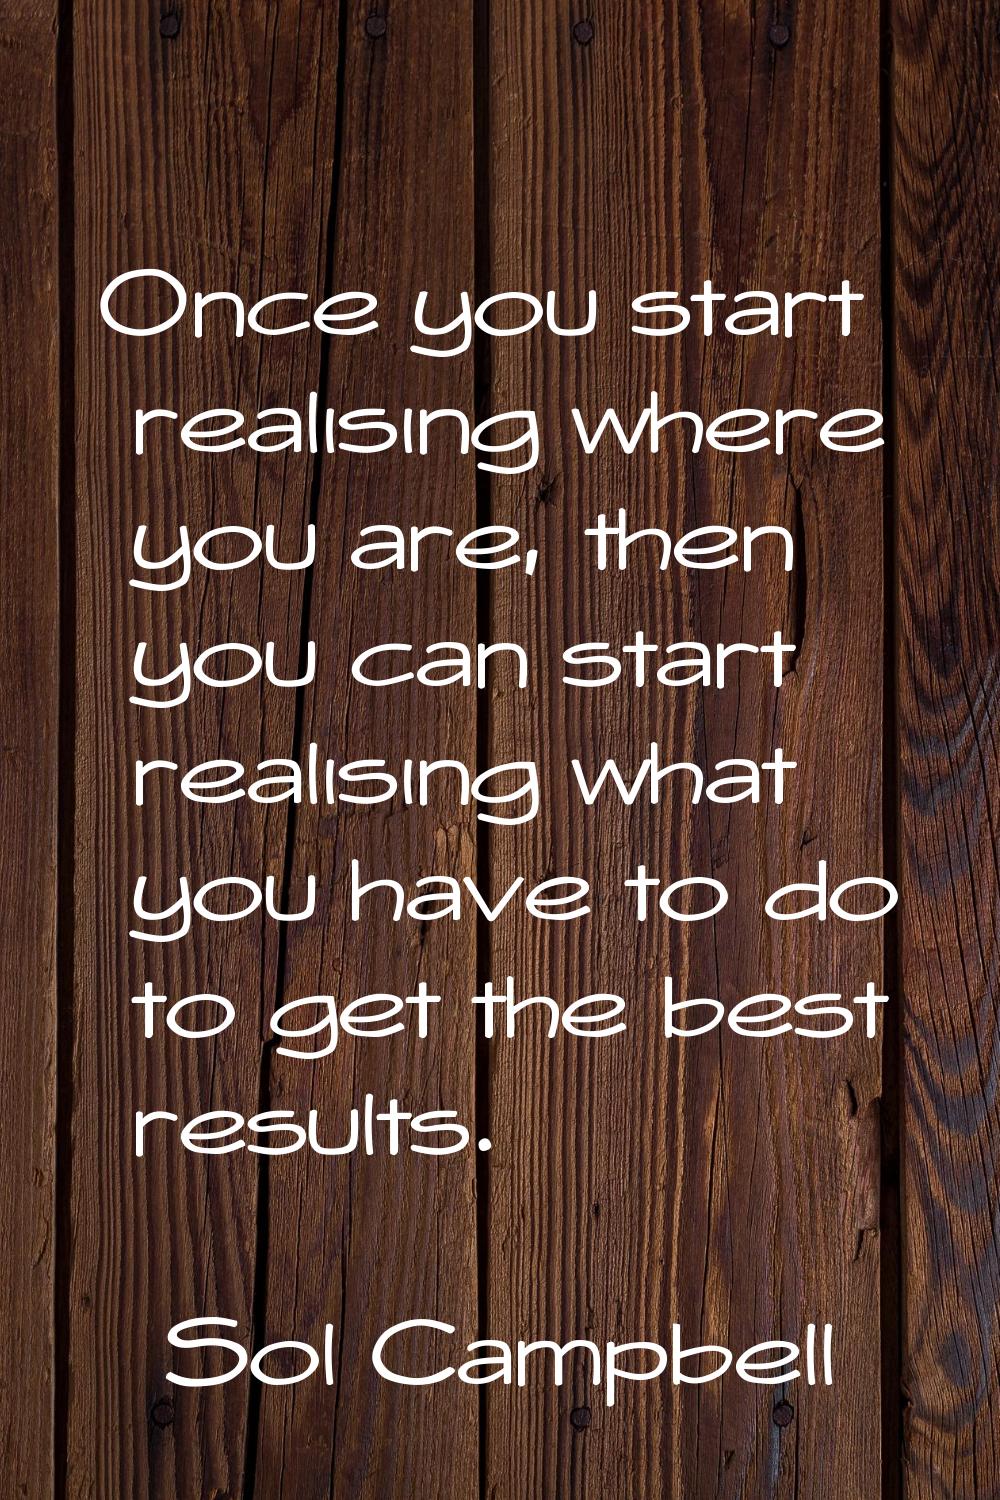 Once you start realising where you are, then you can start realising what you have to do to get the